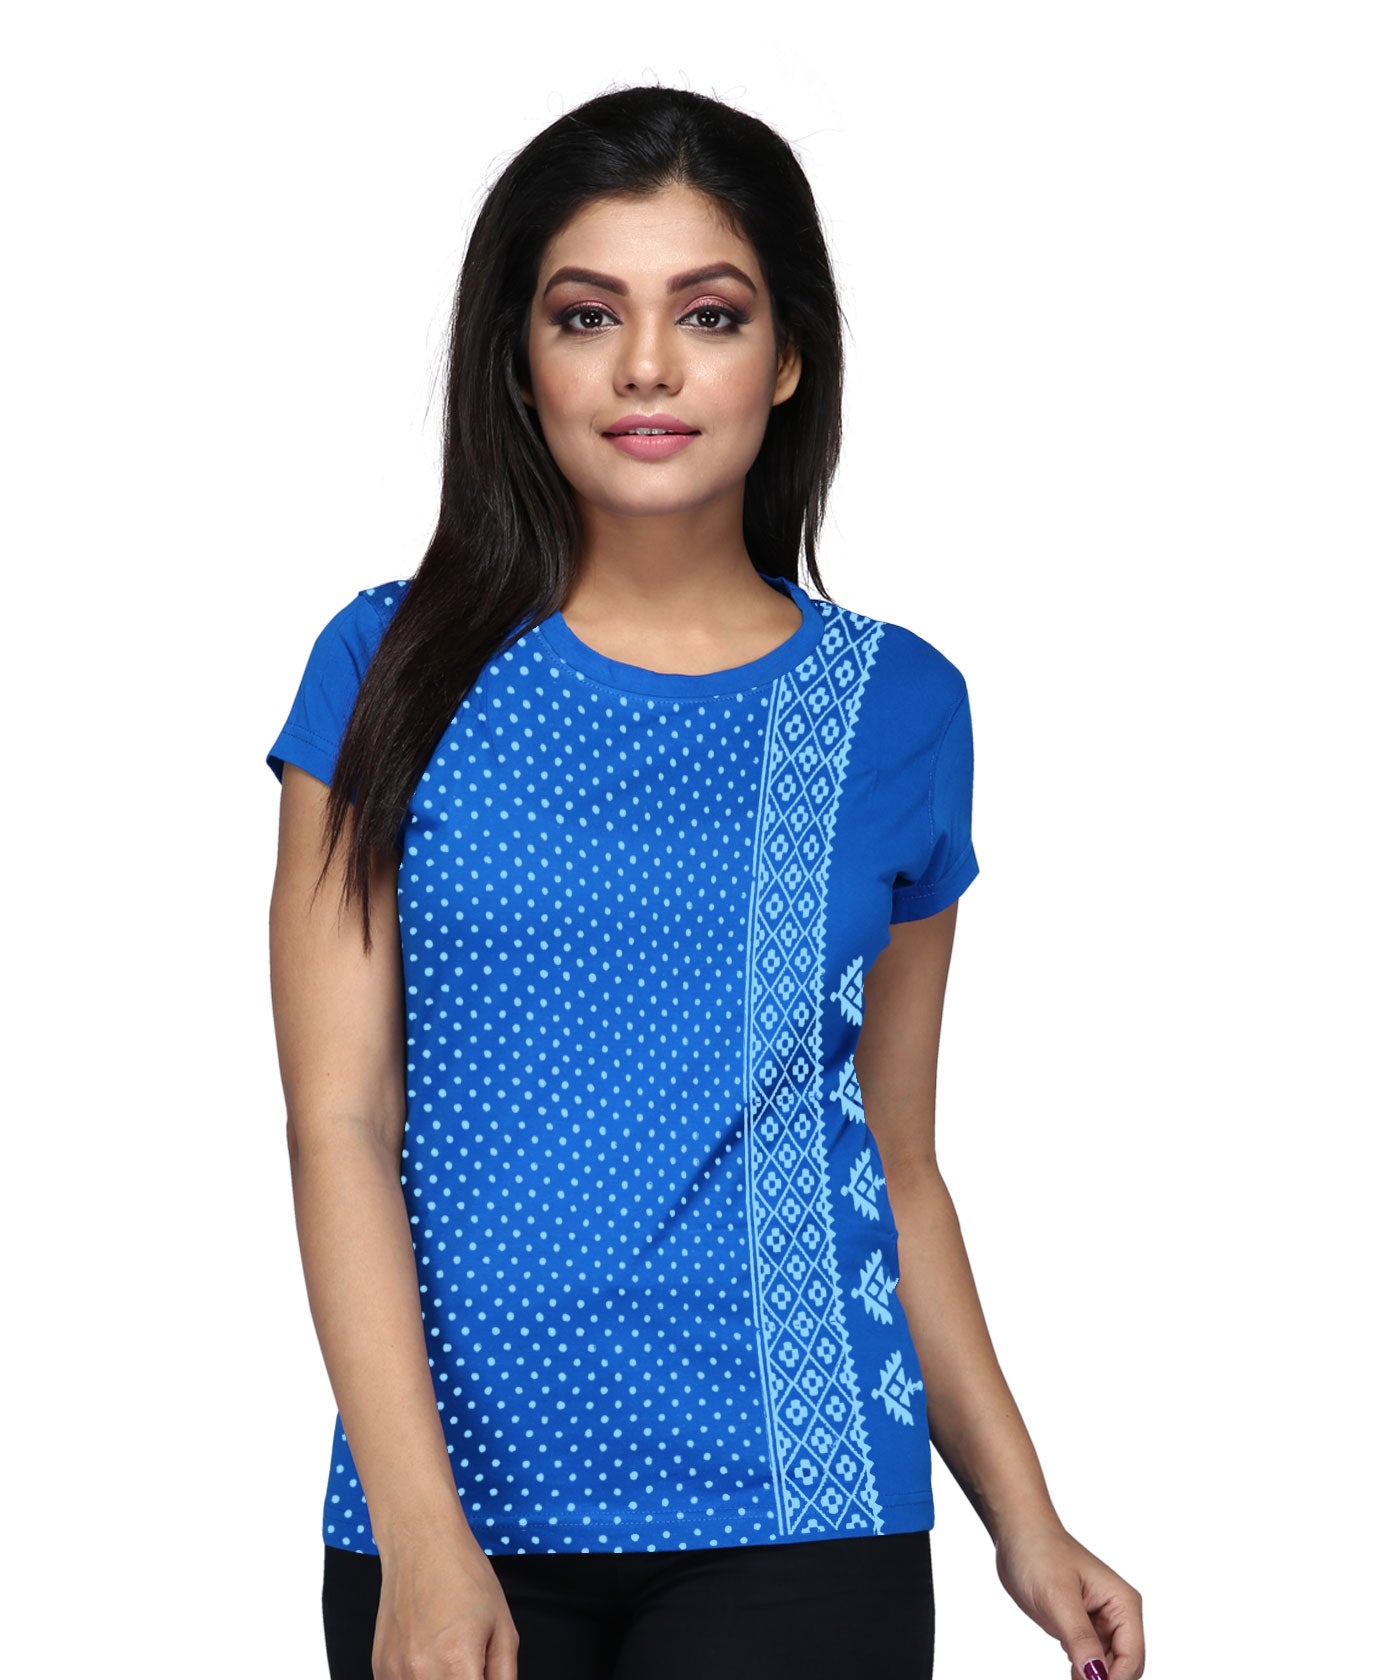 Not All Over - Block Print Tees for Women - Electric Blue